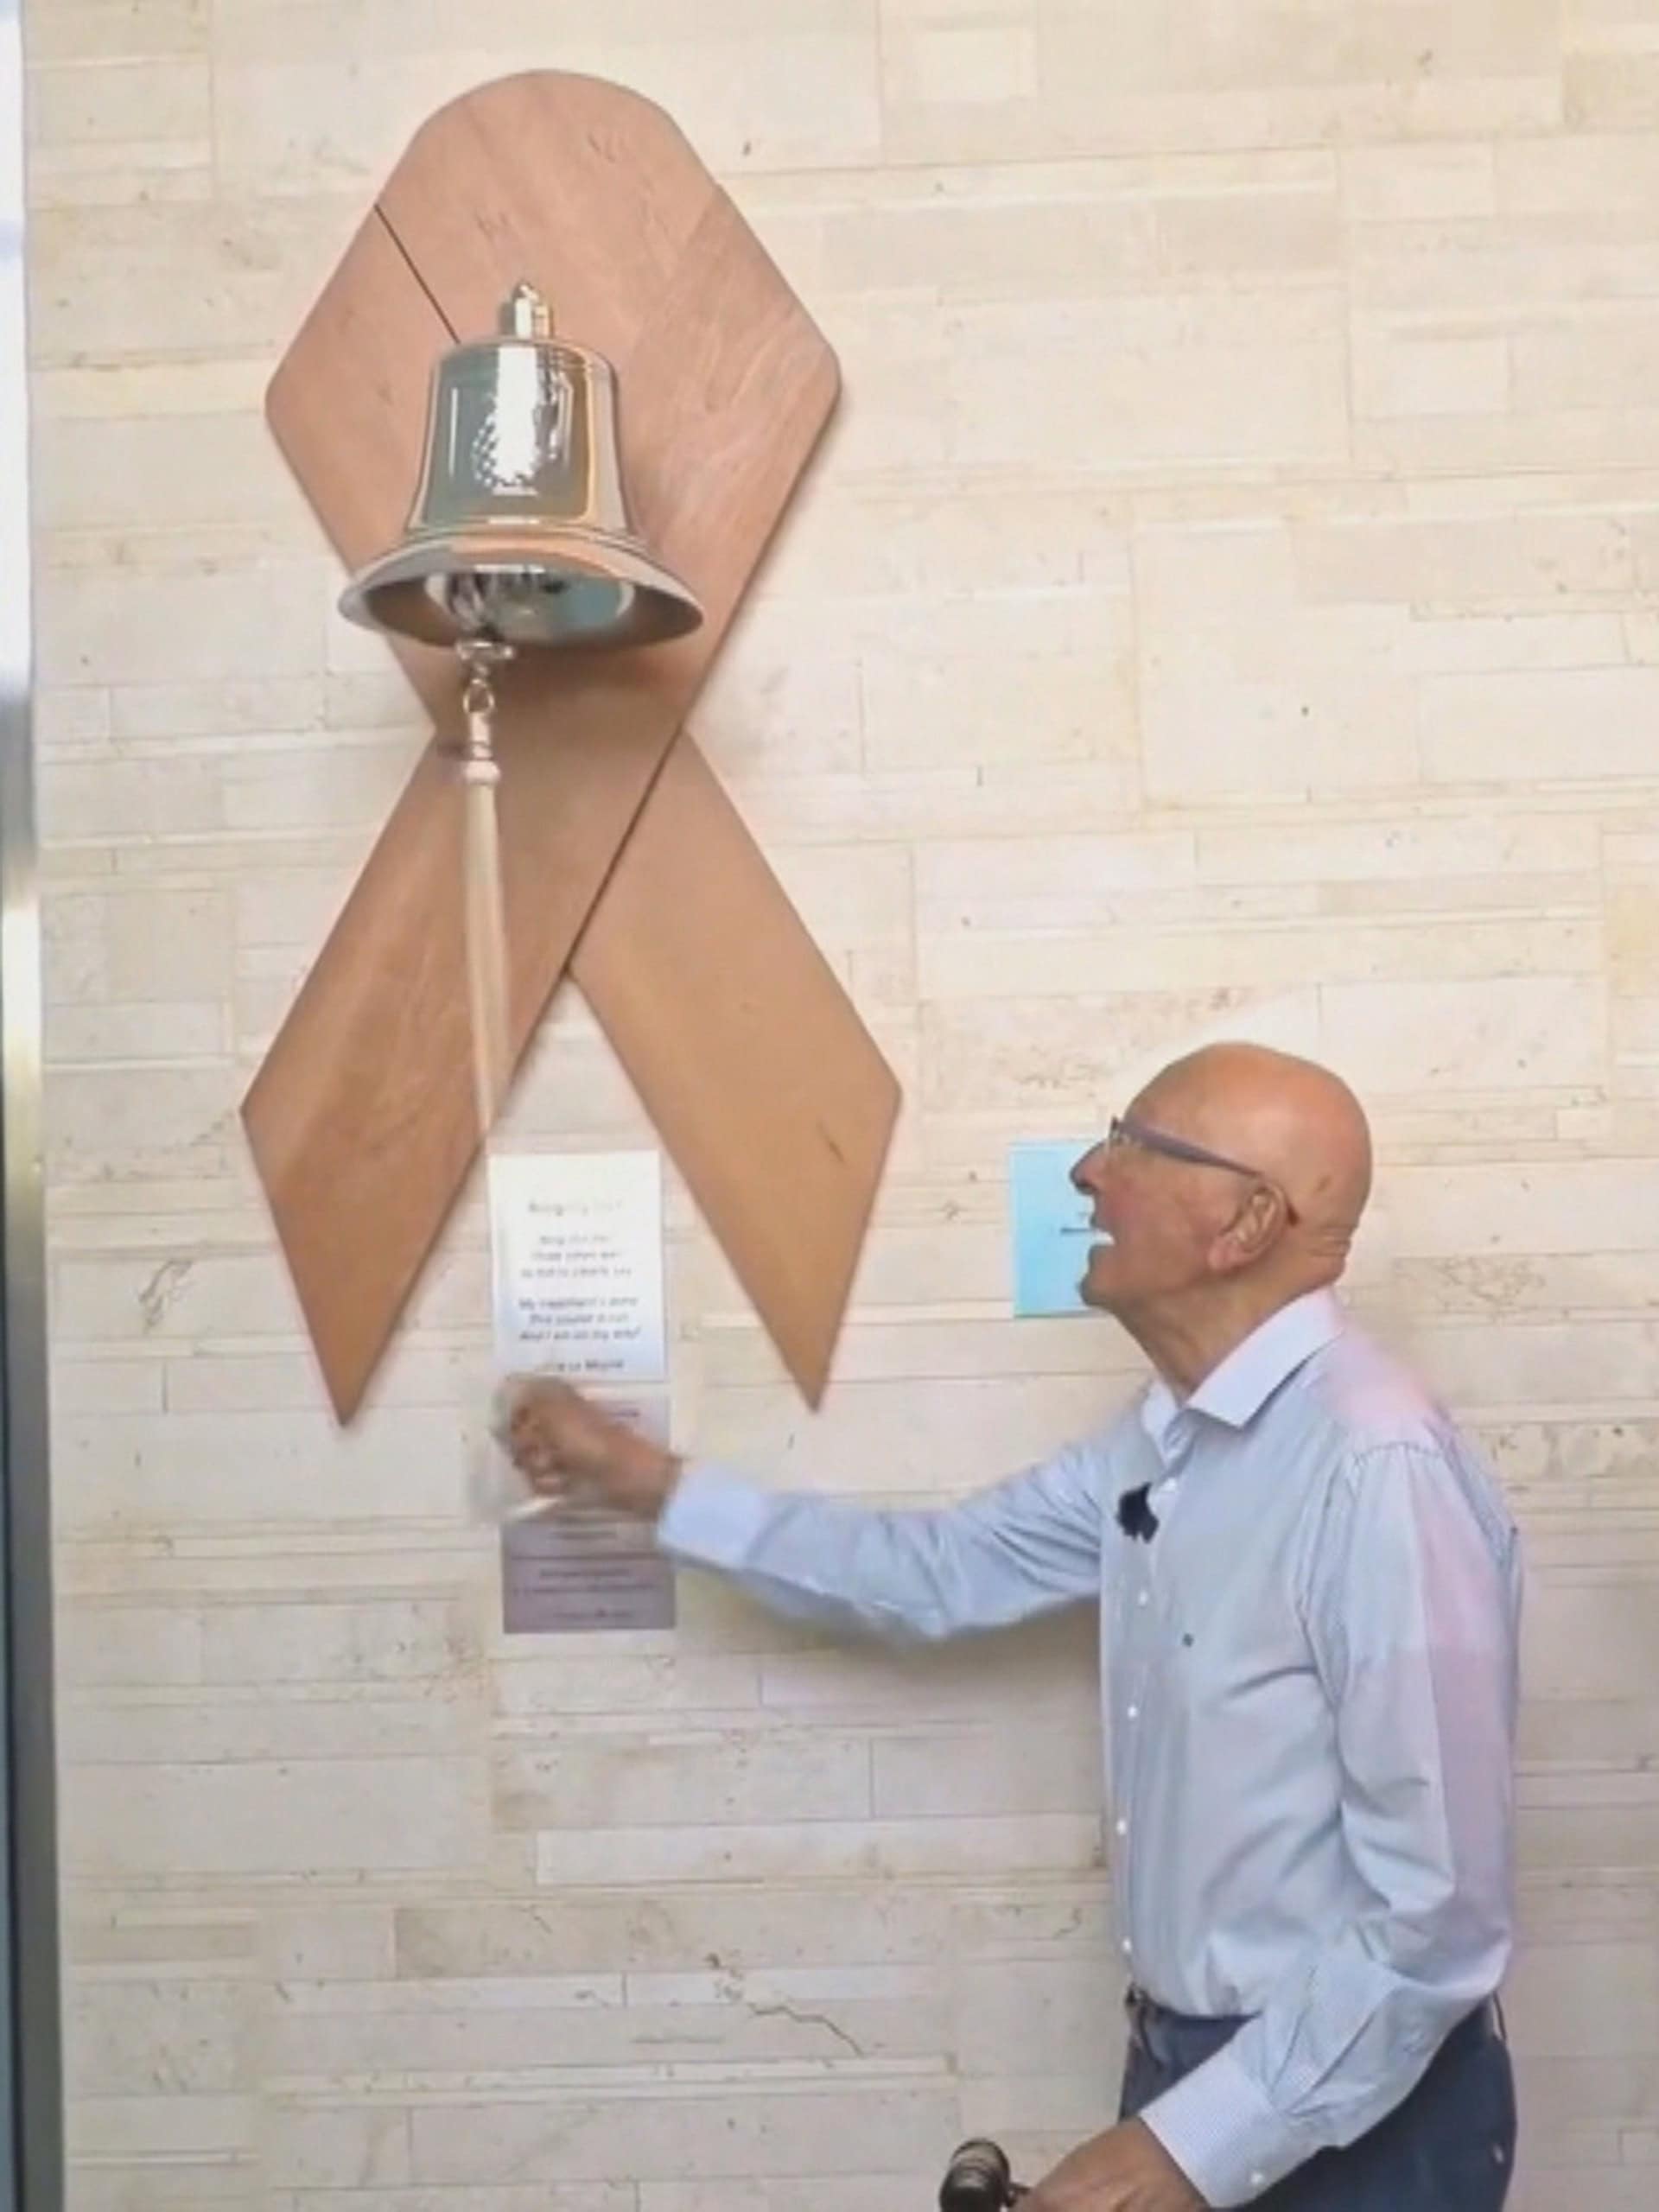 Judge Frank Caprio Triumphs Over Cancer and Rings the Bell of Healing